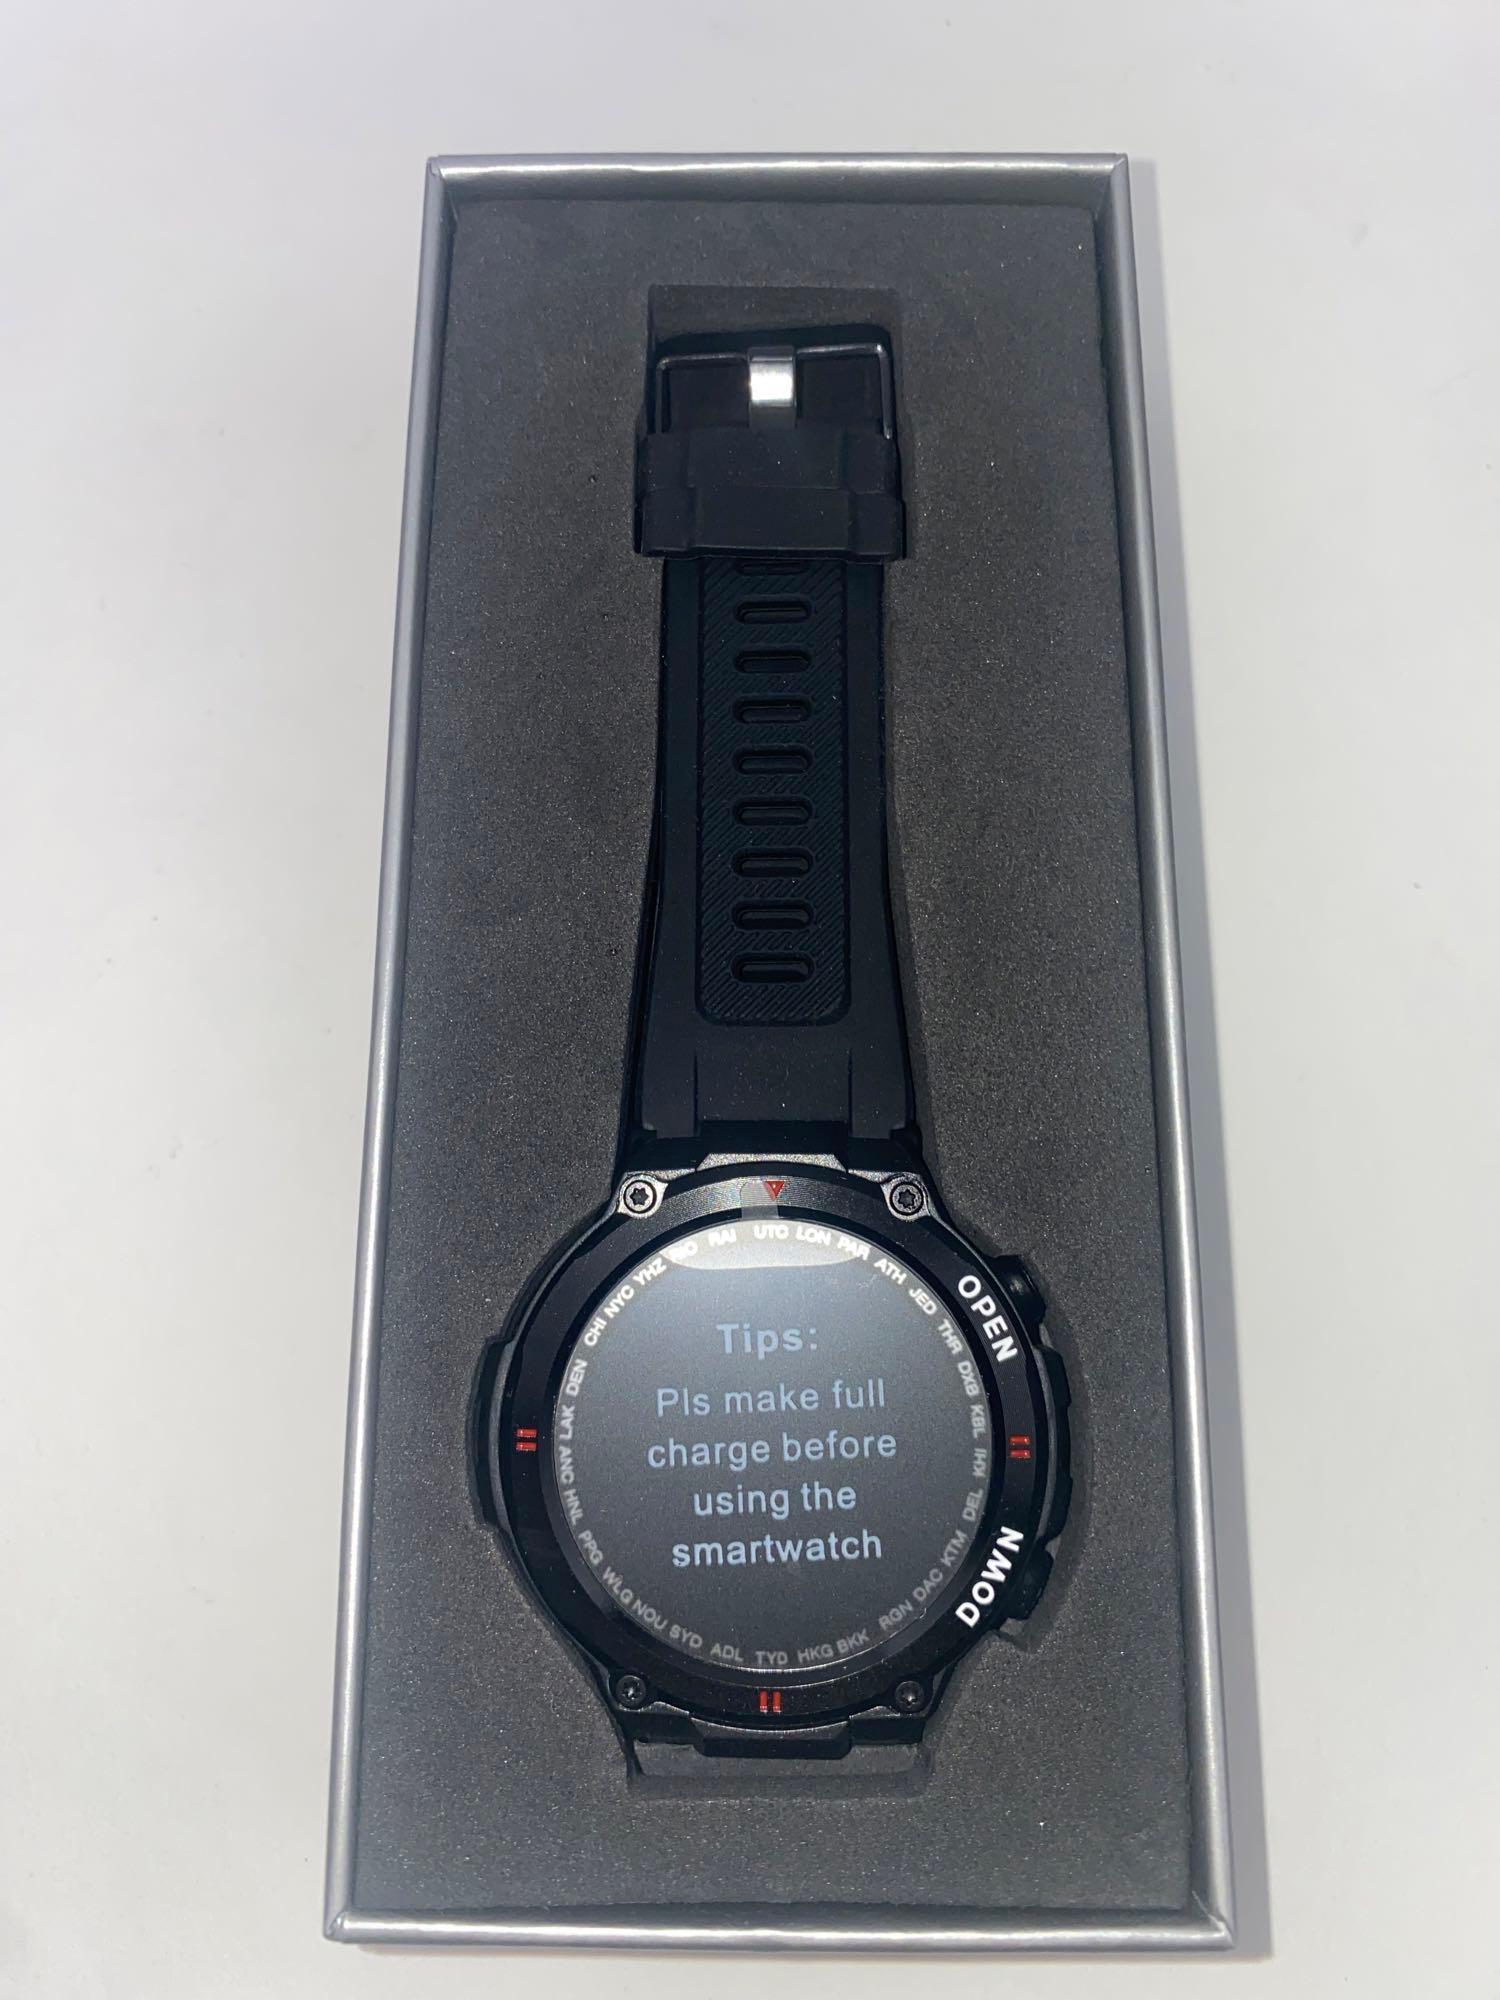 Cacgo Sport Smartwatch with Blood Oxygen, Sleep Detection and Bluetooth Calling, $175.00 (BRAND NEW)